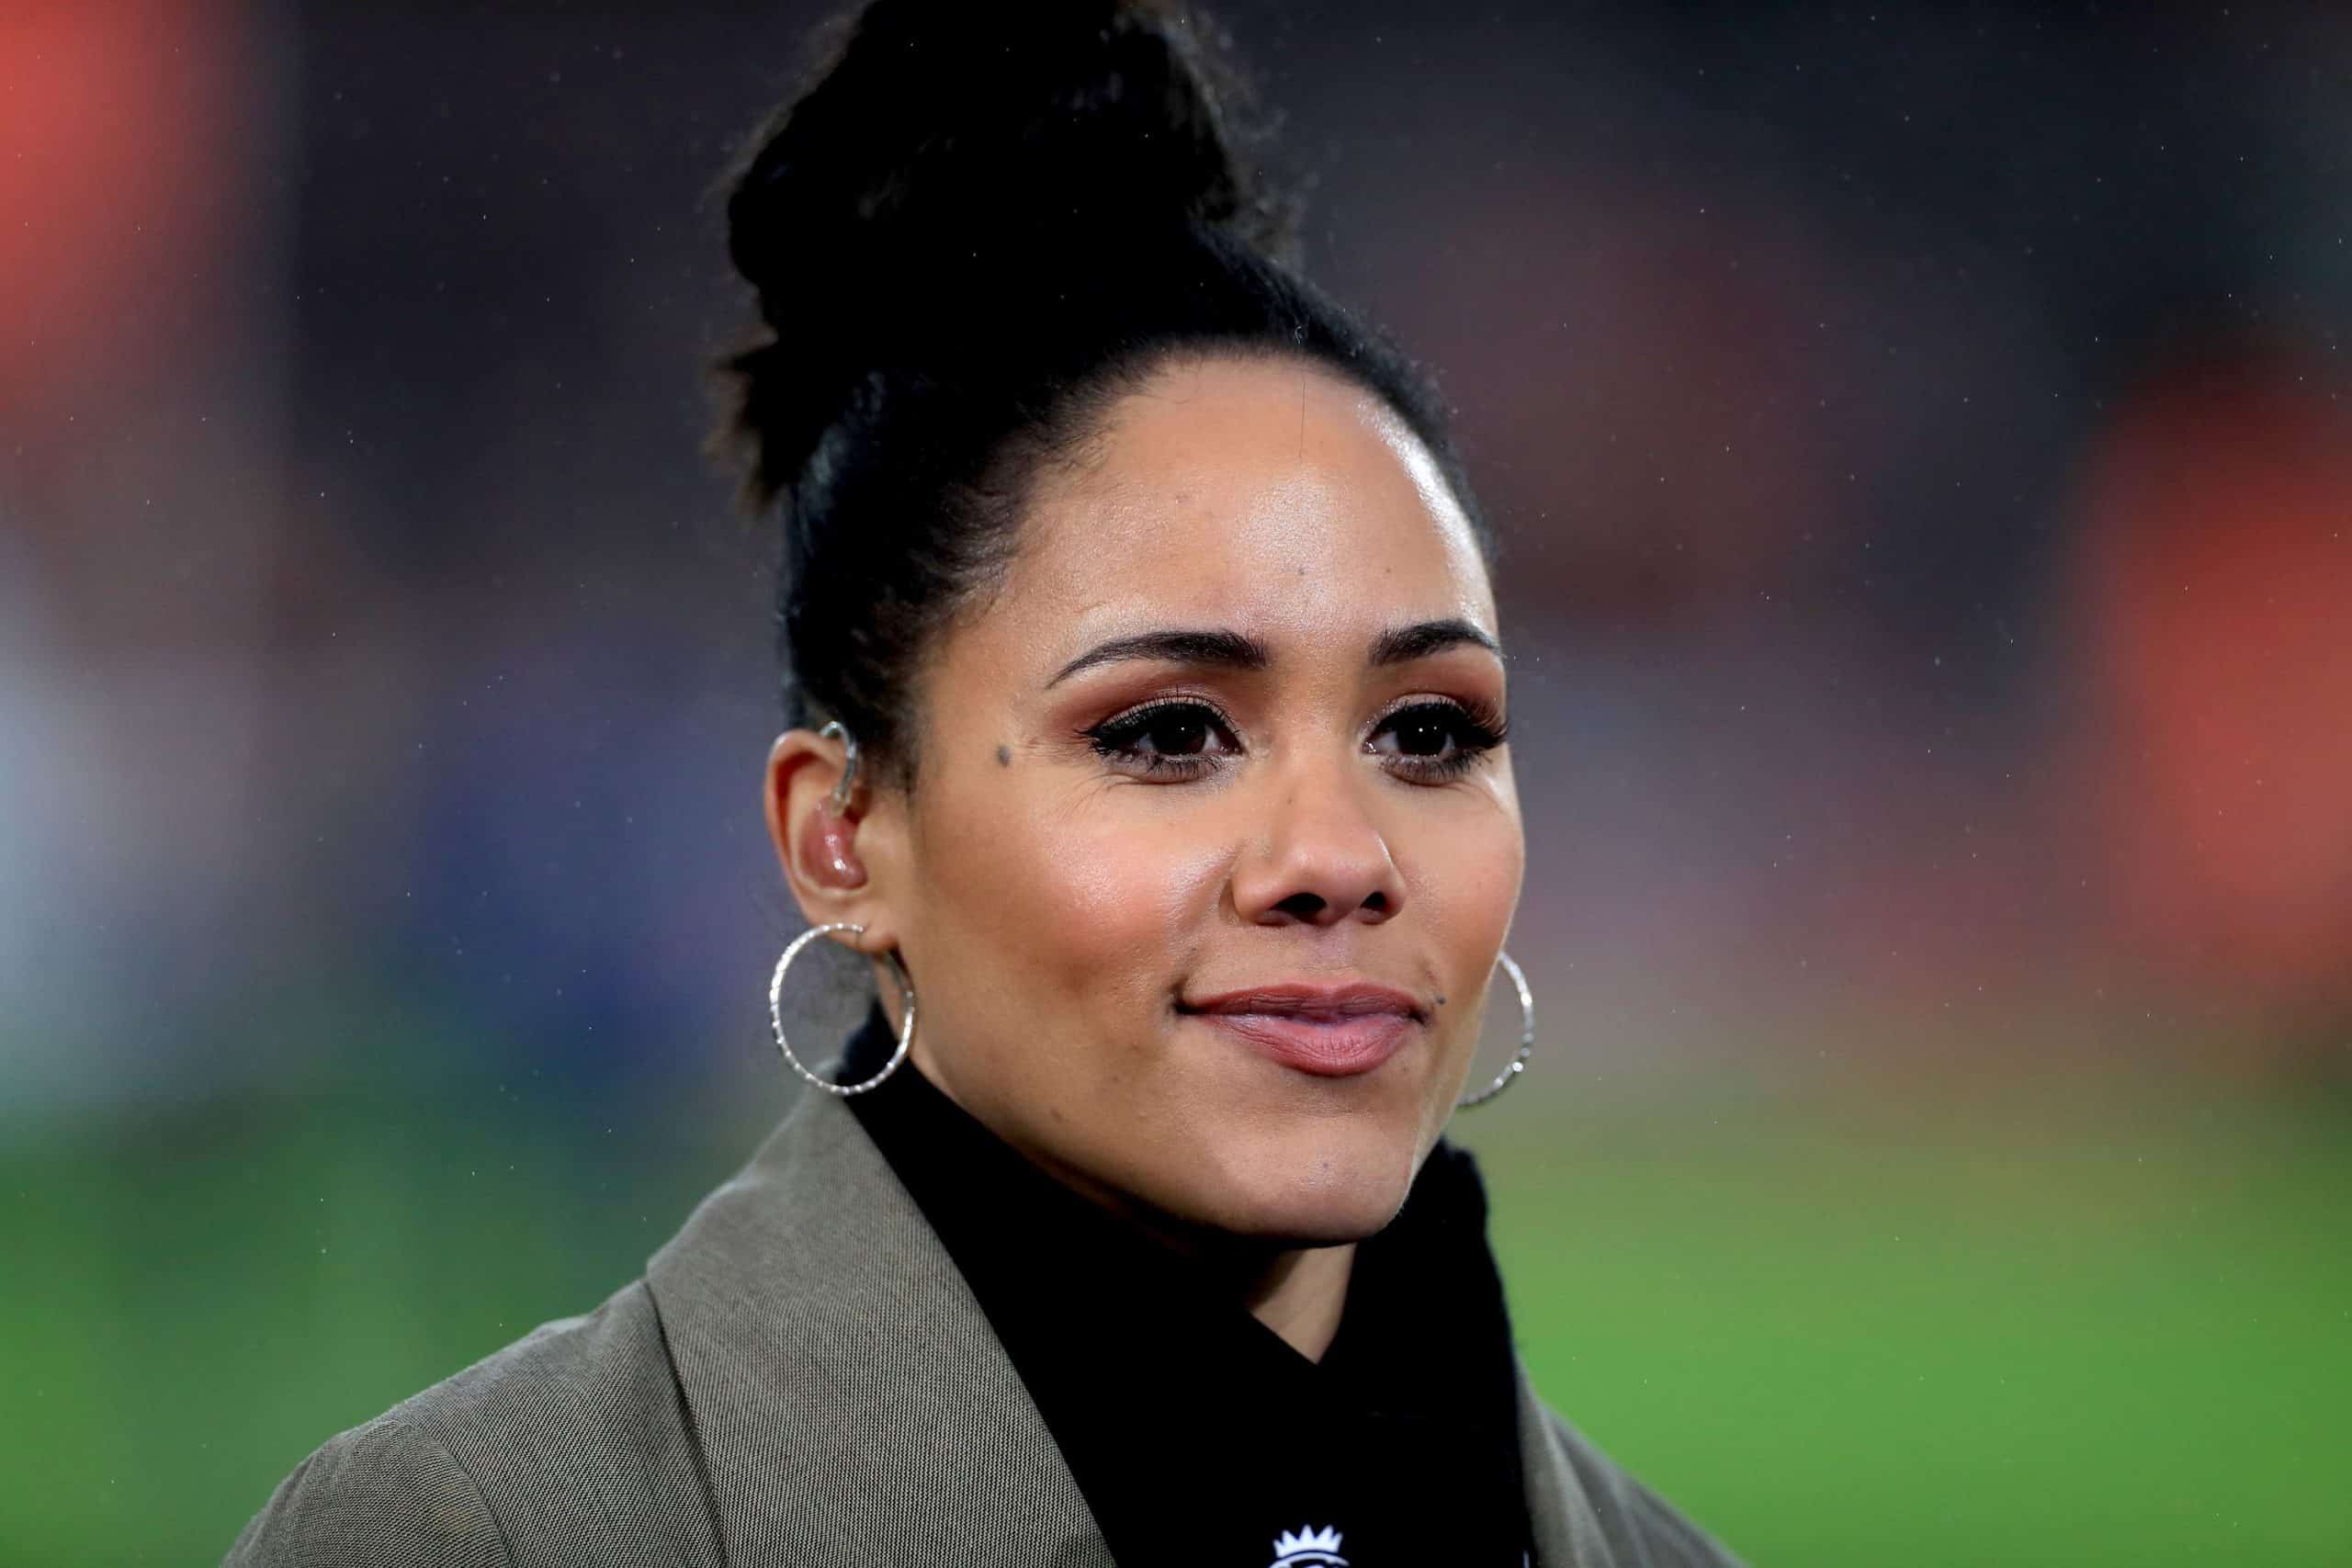 Alex Scott hailed for cheeky on-air nod to Lord Jones comments